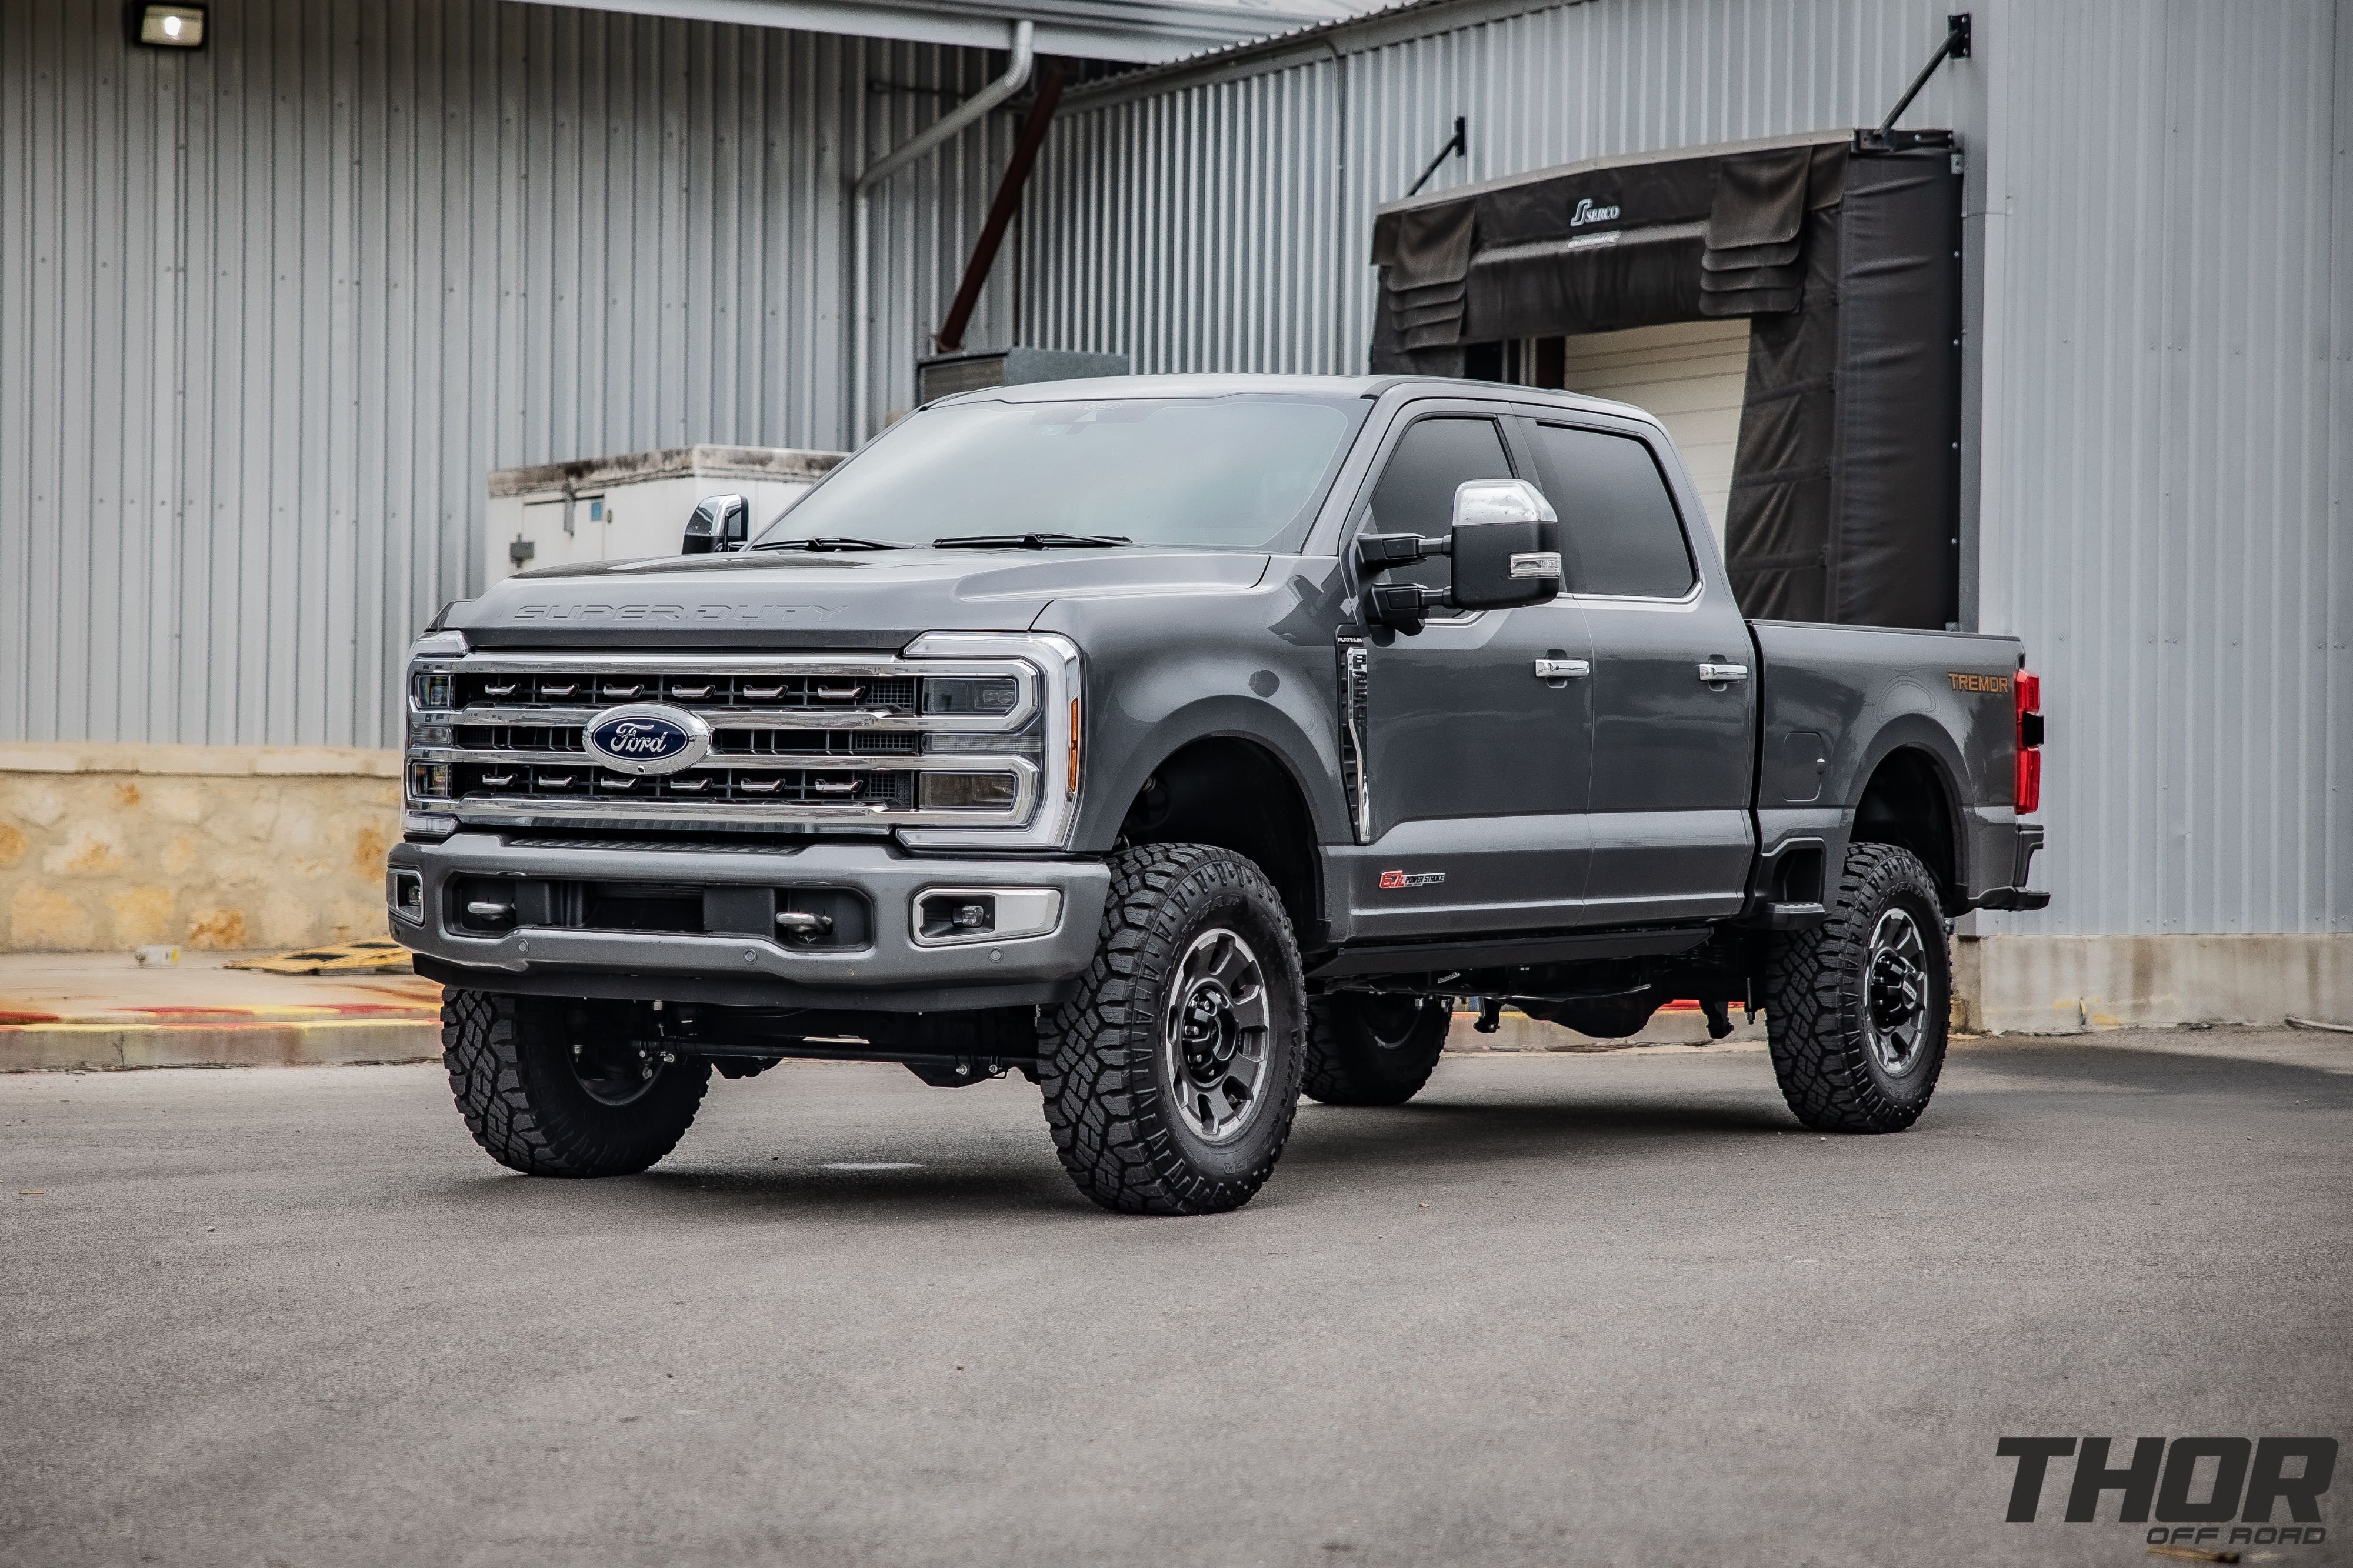 2024 Ford F-250 Super Duty Platinum in Gray with Carli Backcountry 3.5" Suspension Kit, Carli 3.5" Full Rear Spring Replacement, Carli Torsion Sway Bar 3.5"